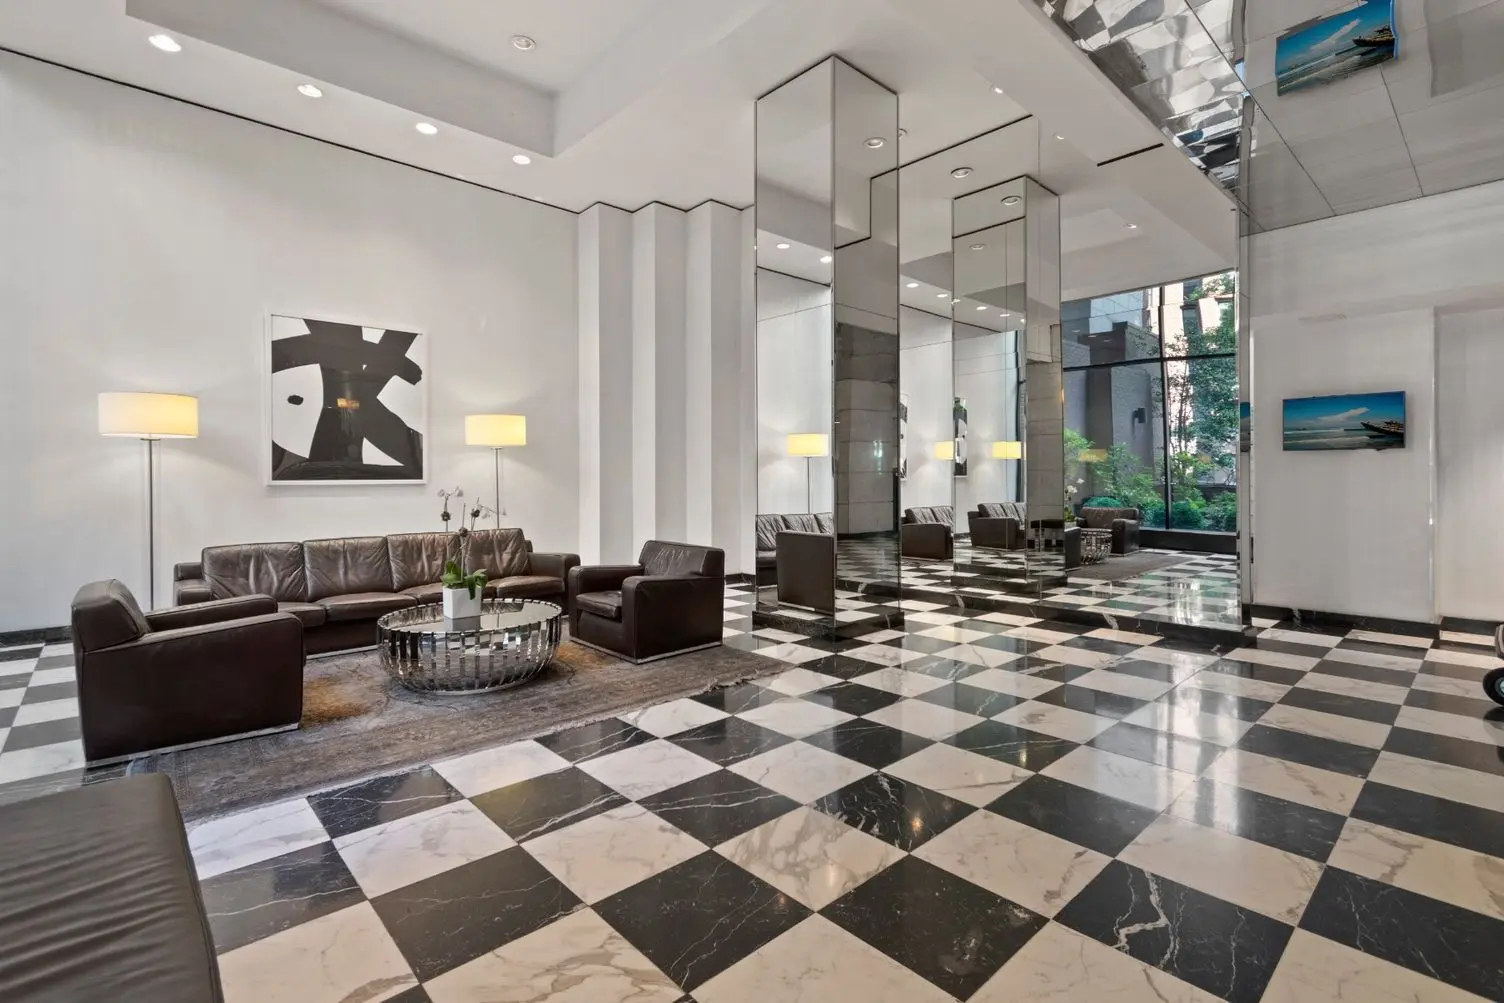 The Paladin, 300 East 62nd Street